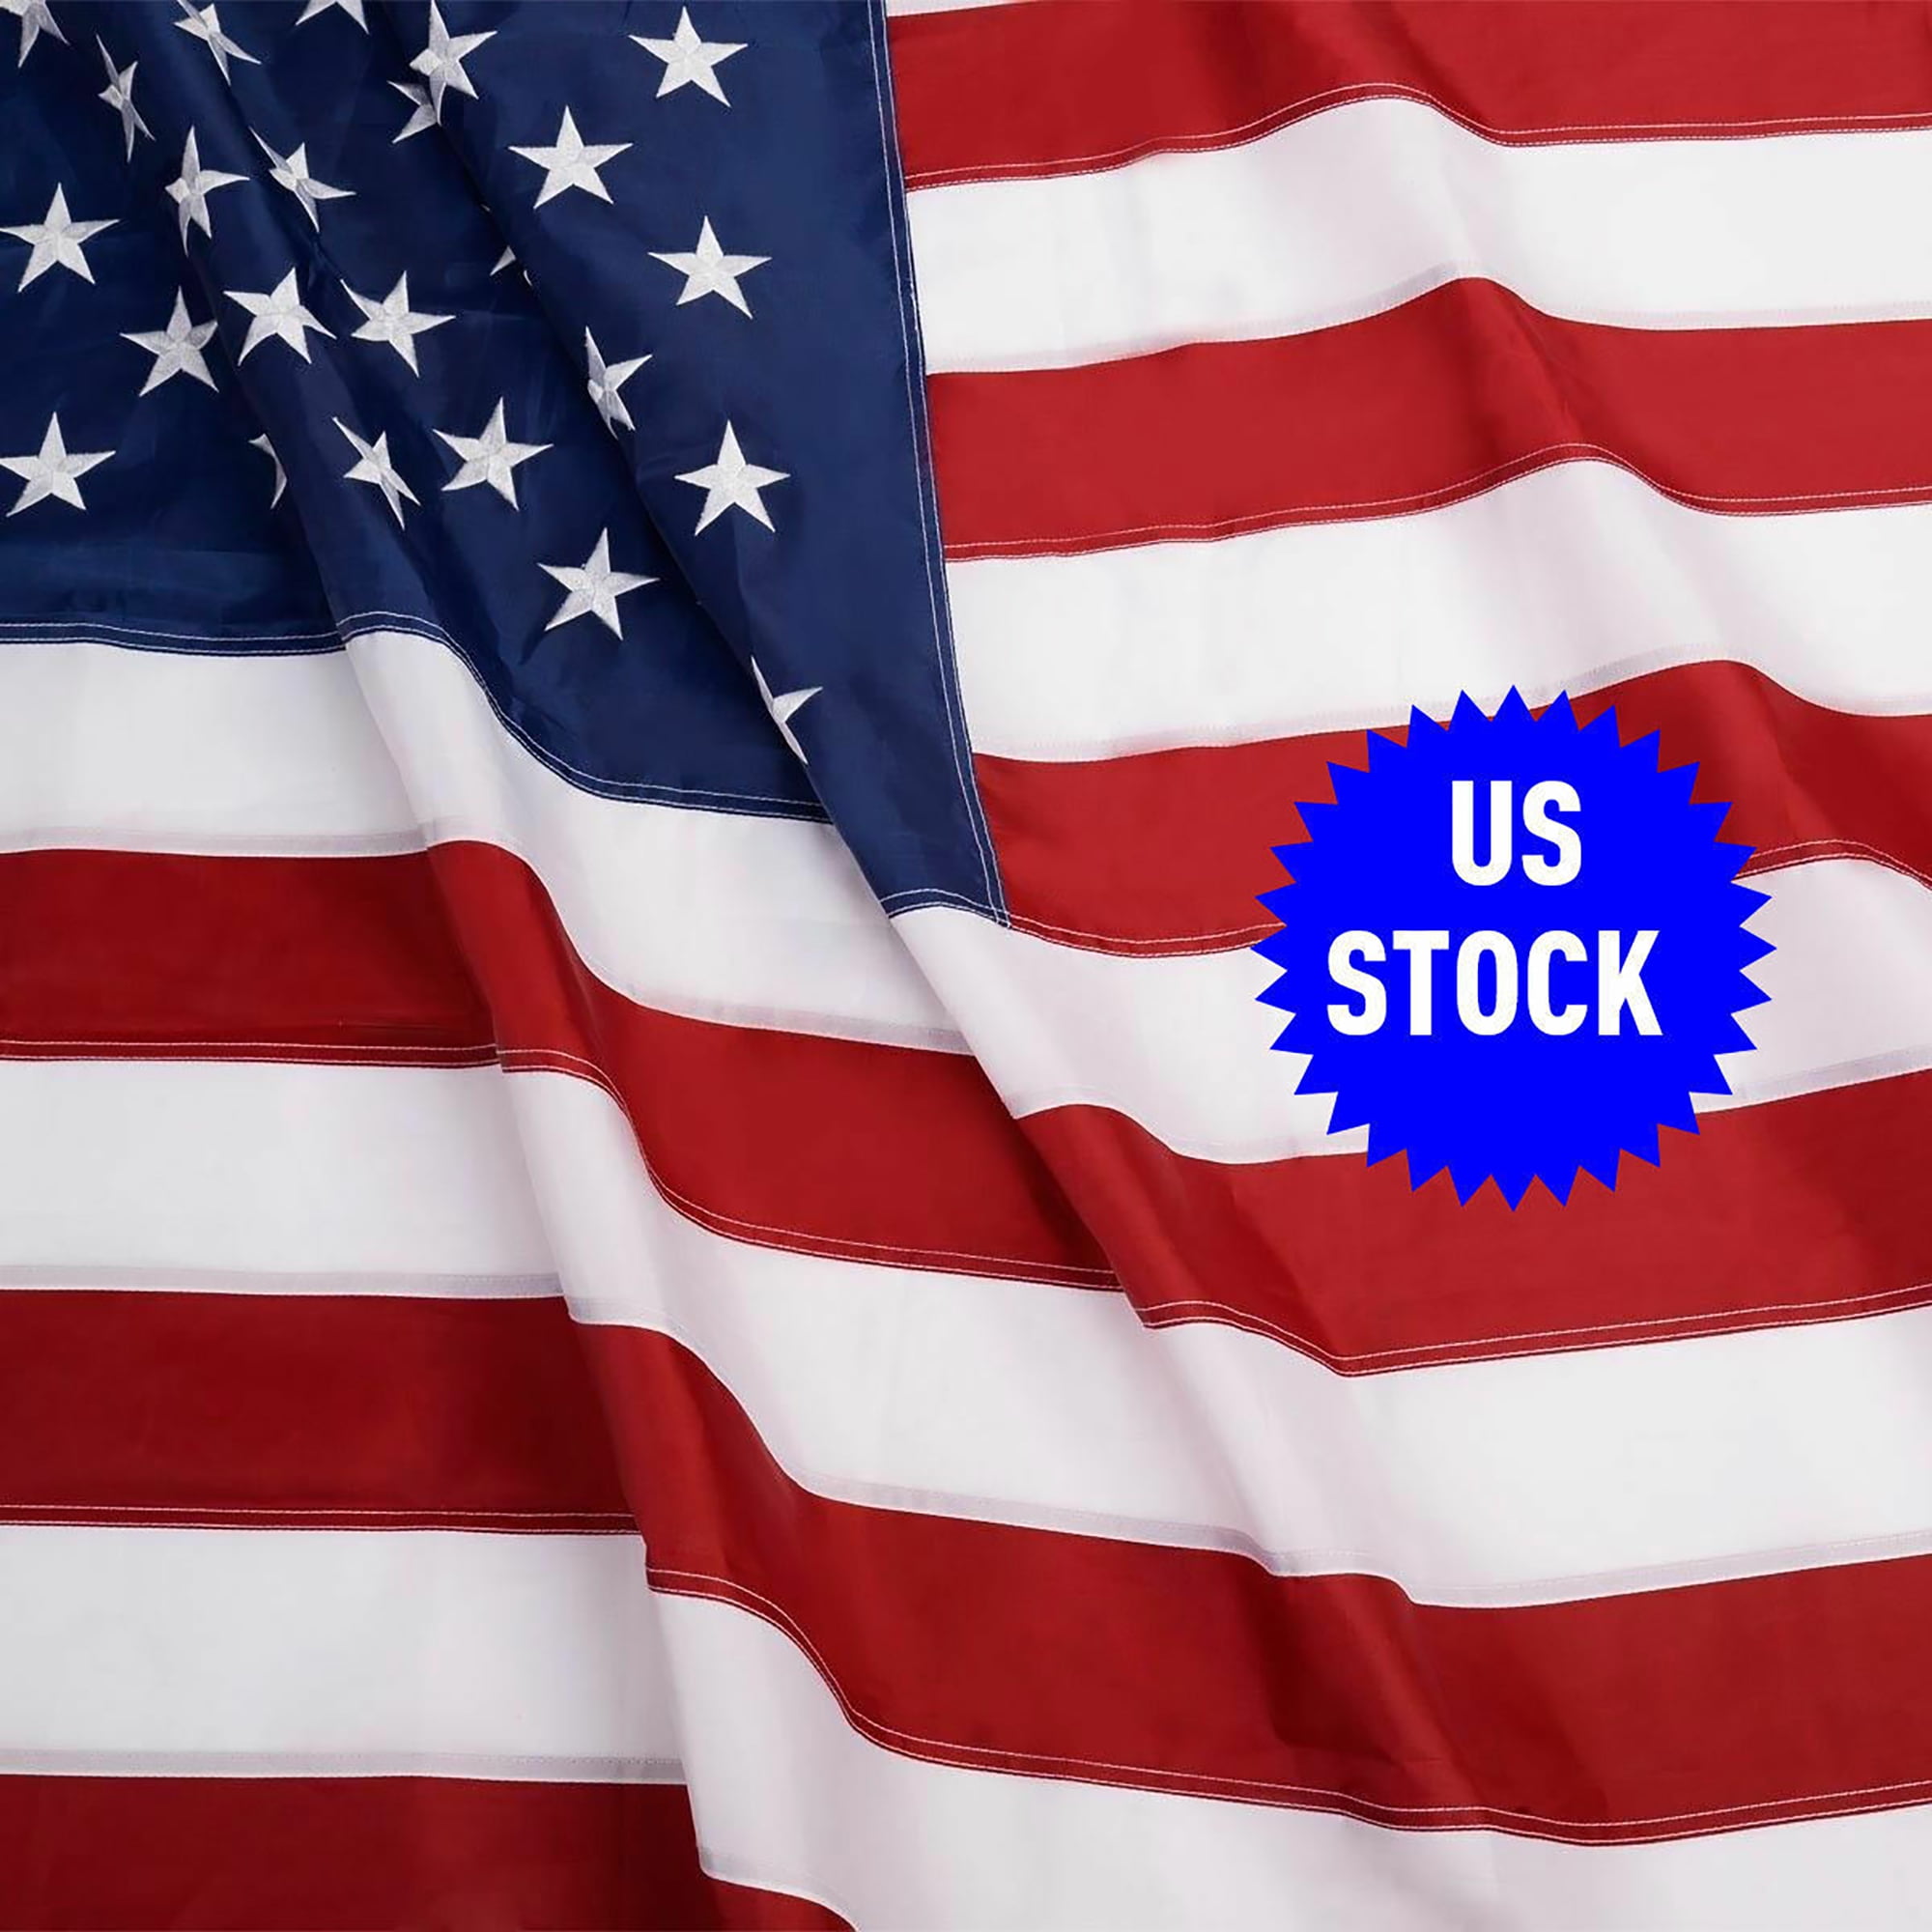 Brass Grommets USA US Flag Durable long Lasting for Outdoor Use Sewn Stripes American Flag 4x6 FT Embroidered Stars